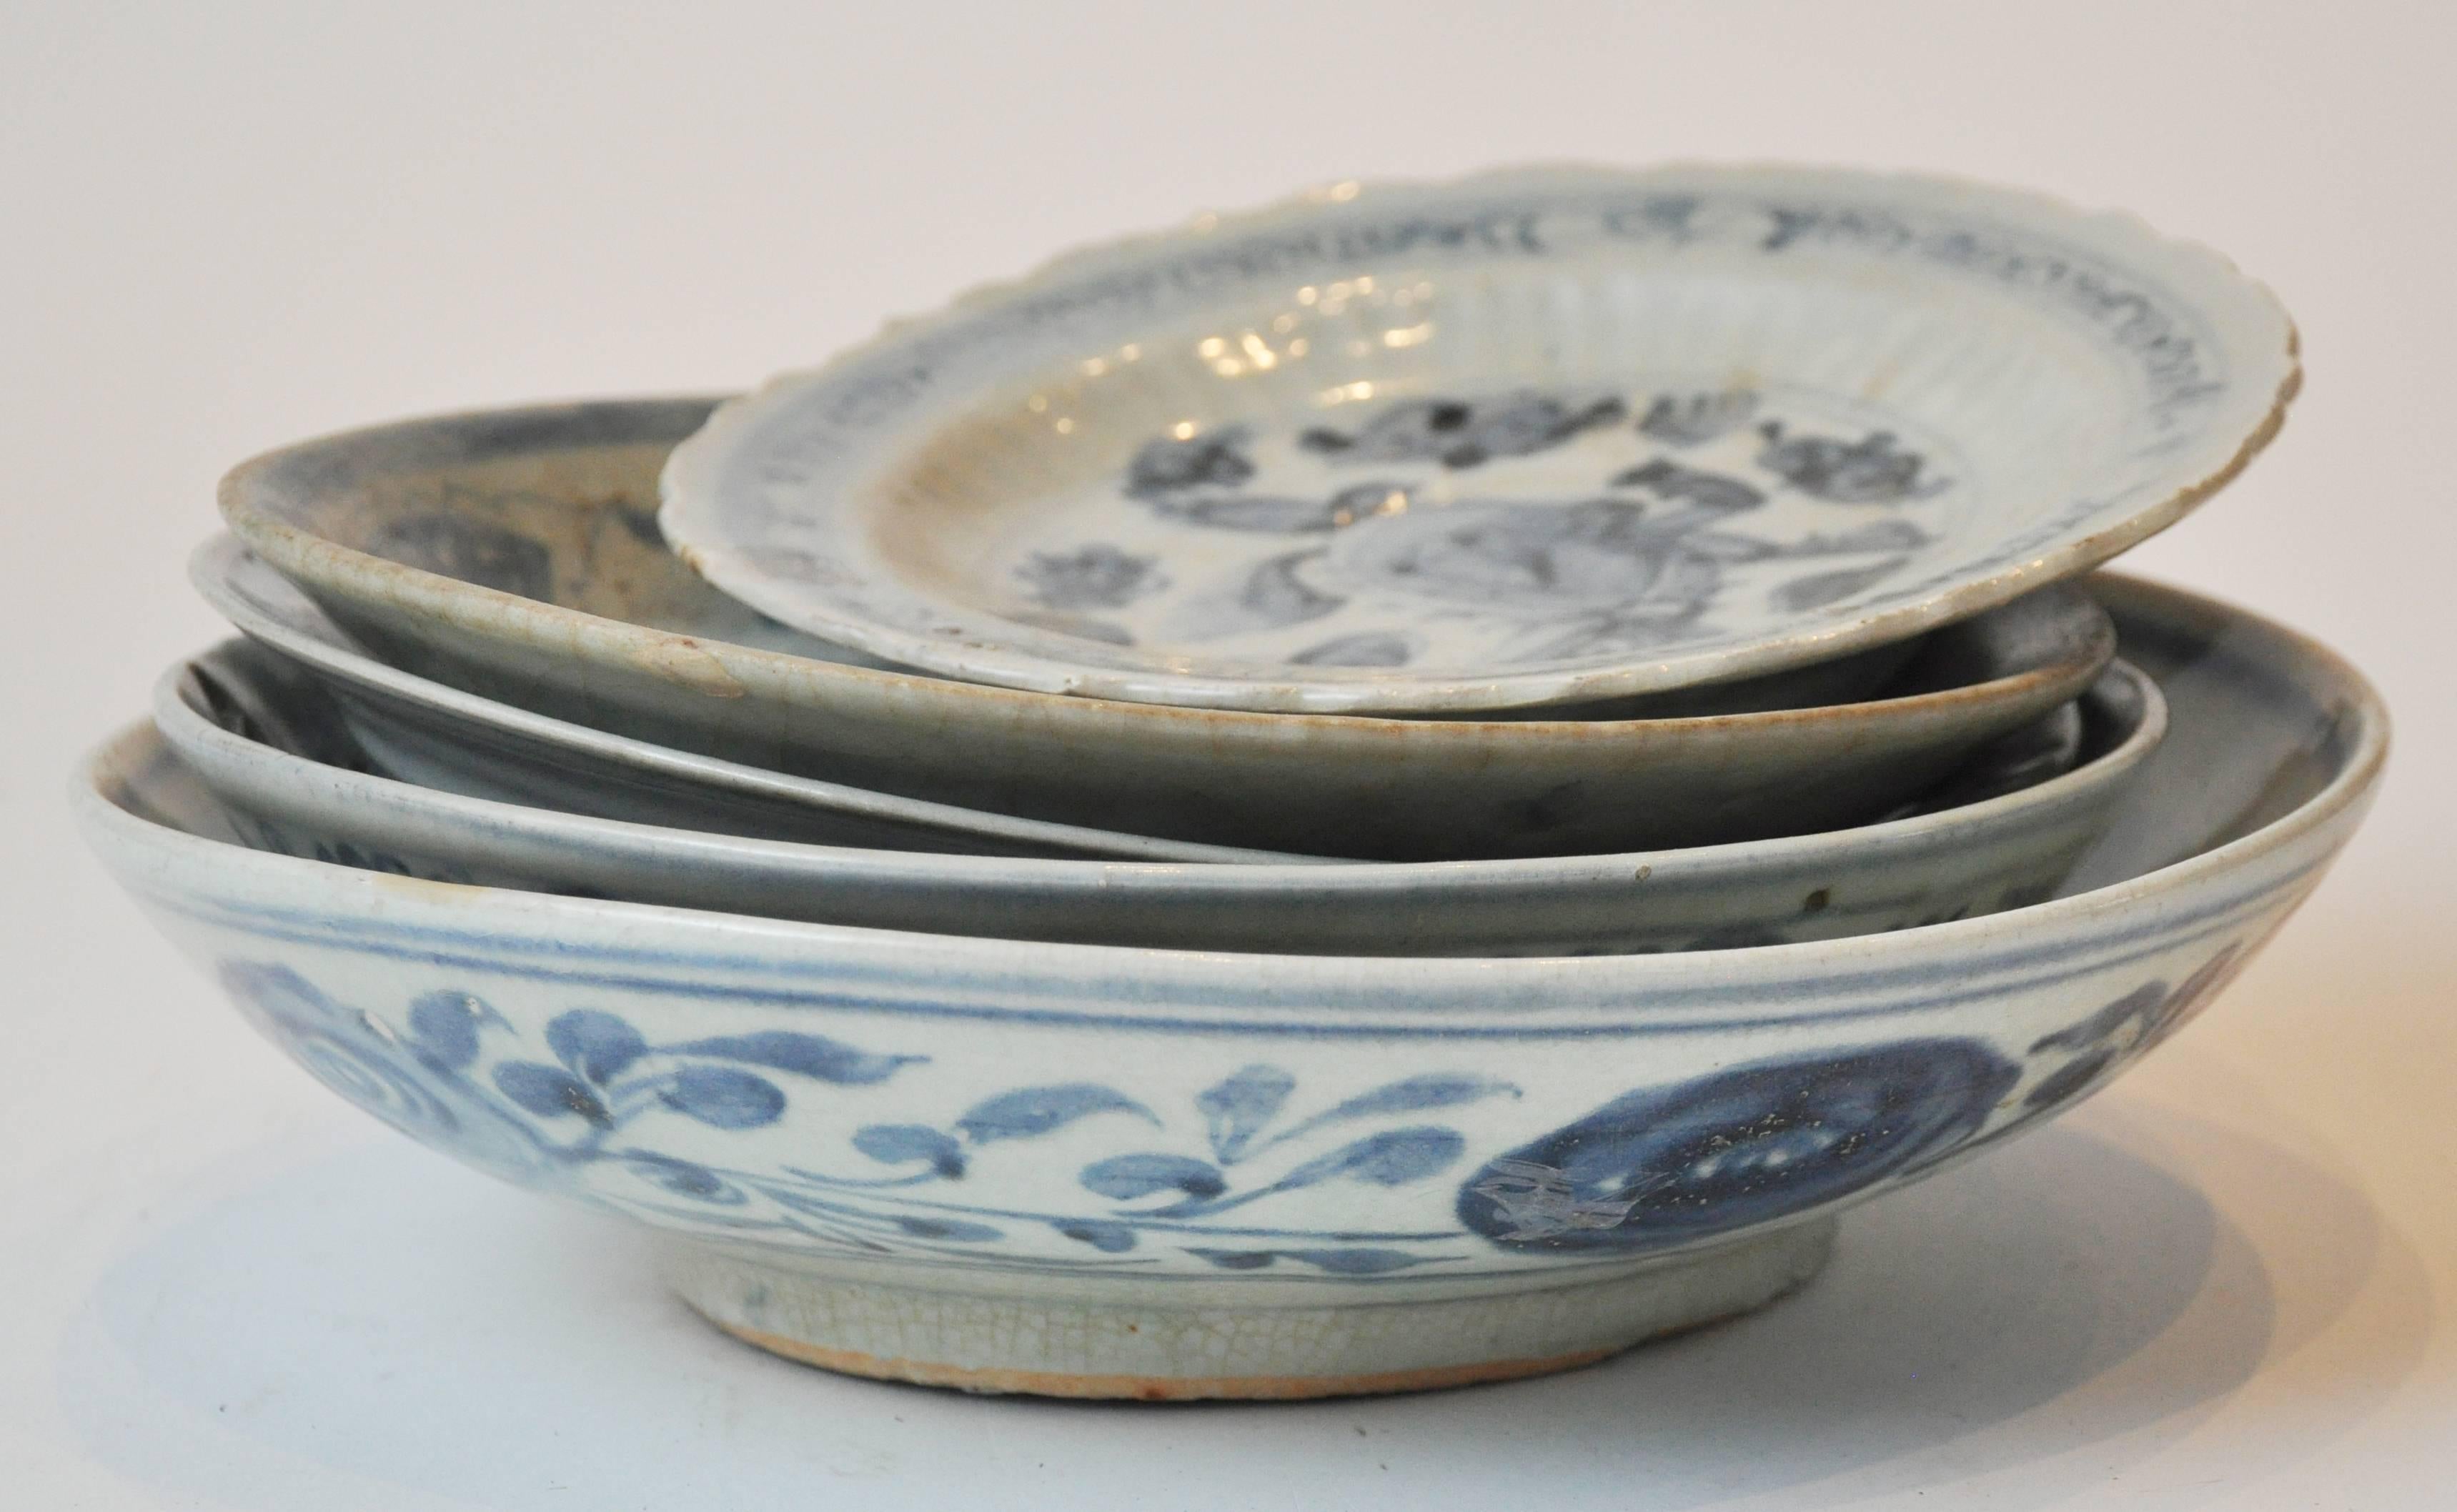 19th century collection of blue and bone Chinese porcelain. The collection has both important and less important pieces.  All have traditional Chinese motifs and some with Celadon coloring.  As a collection they are beautiful together. 

Measures: